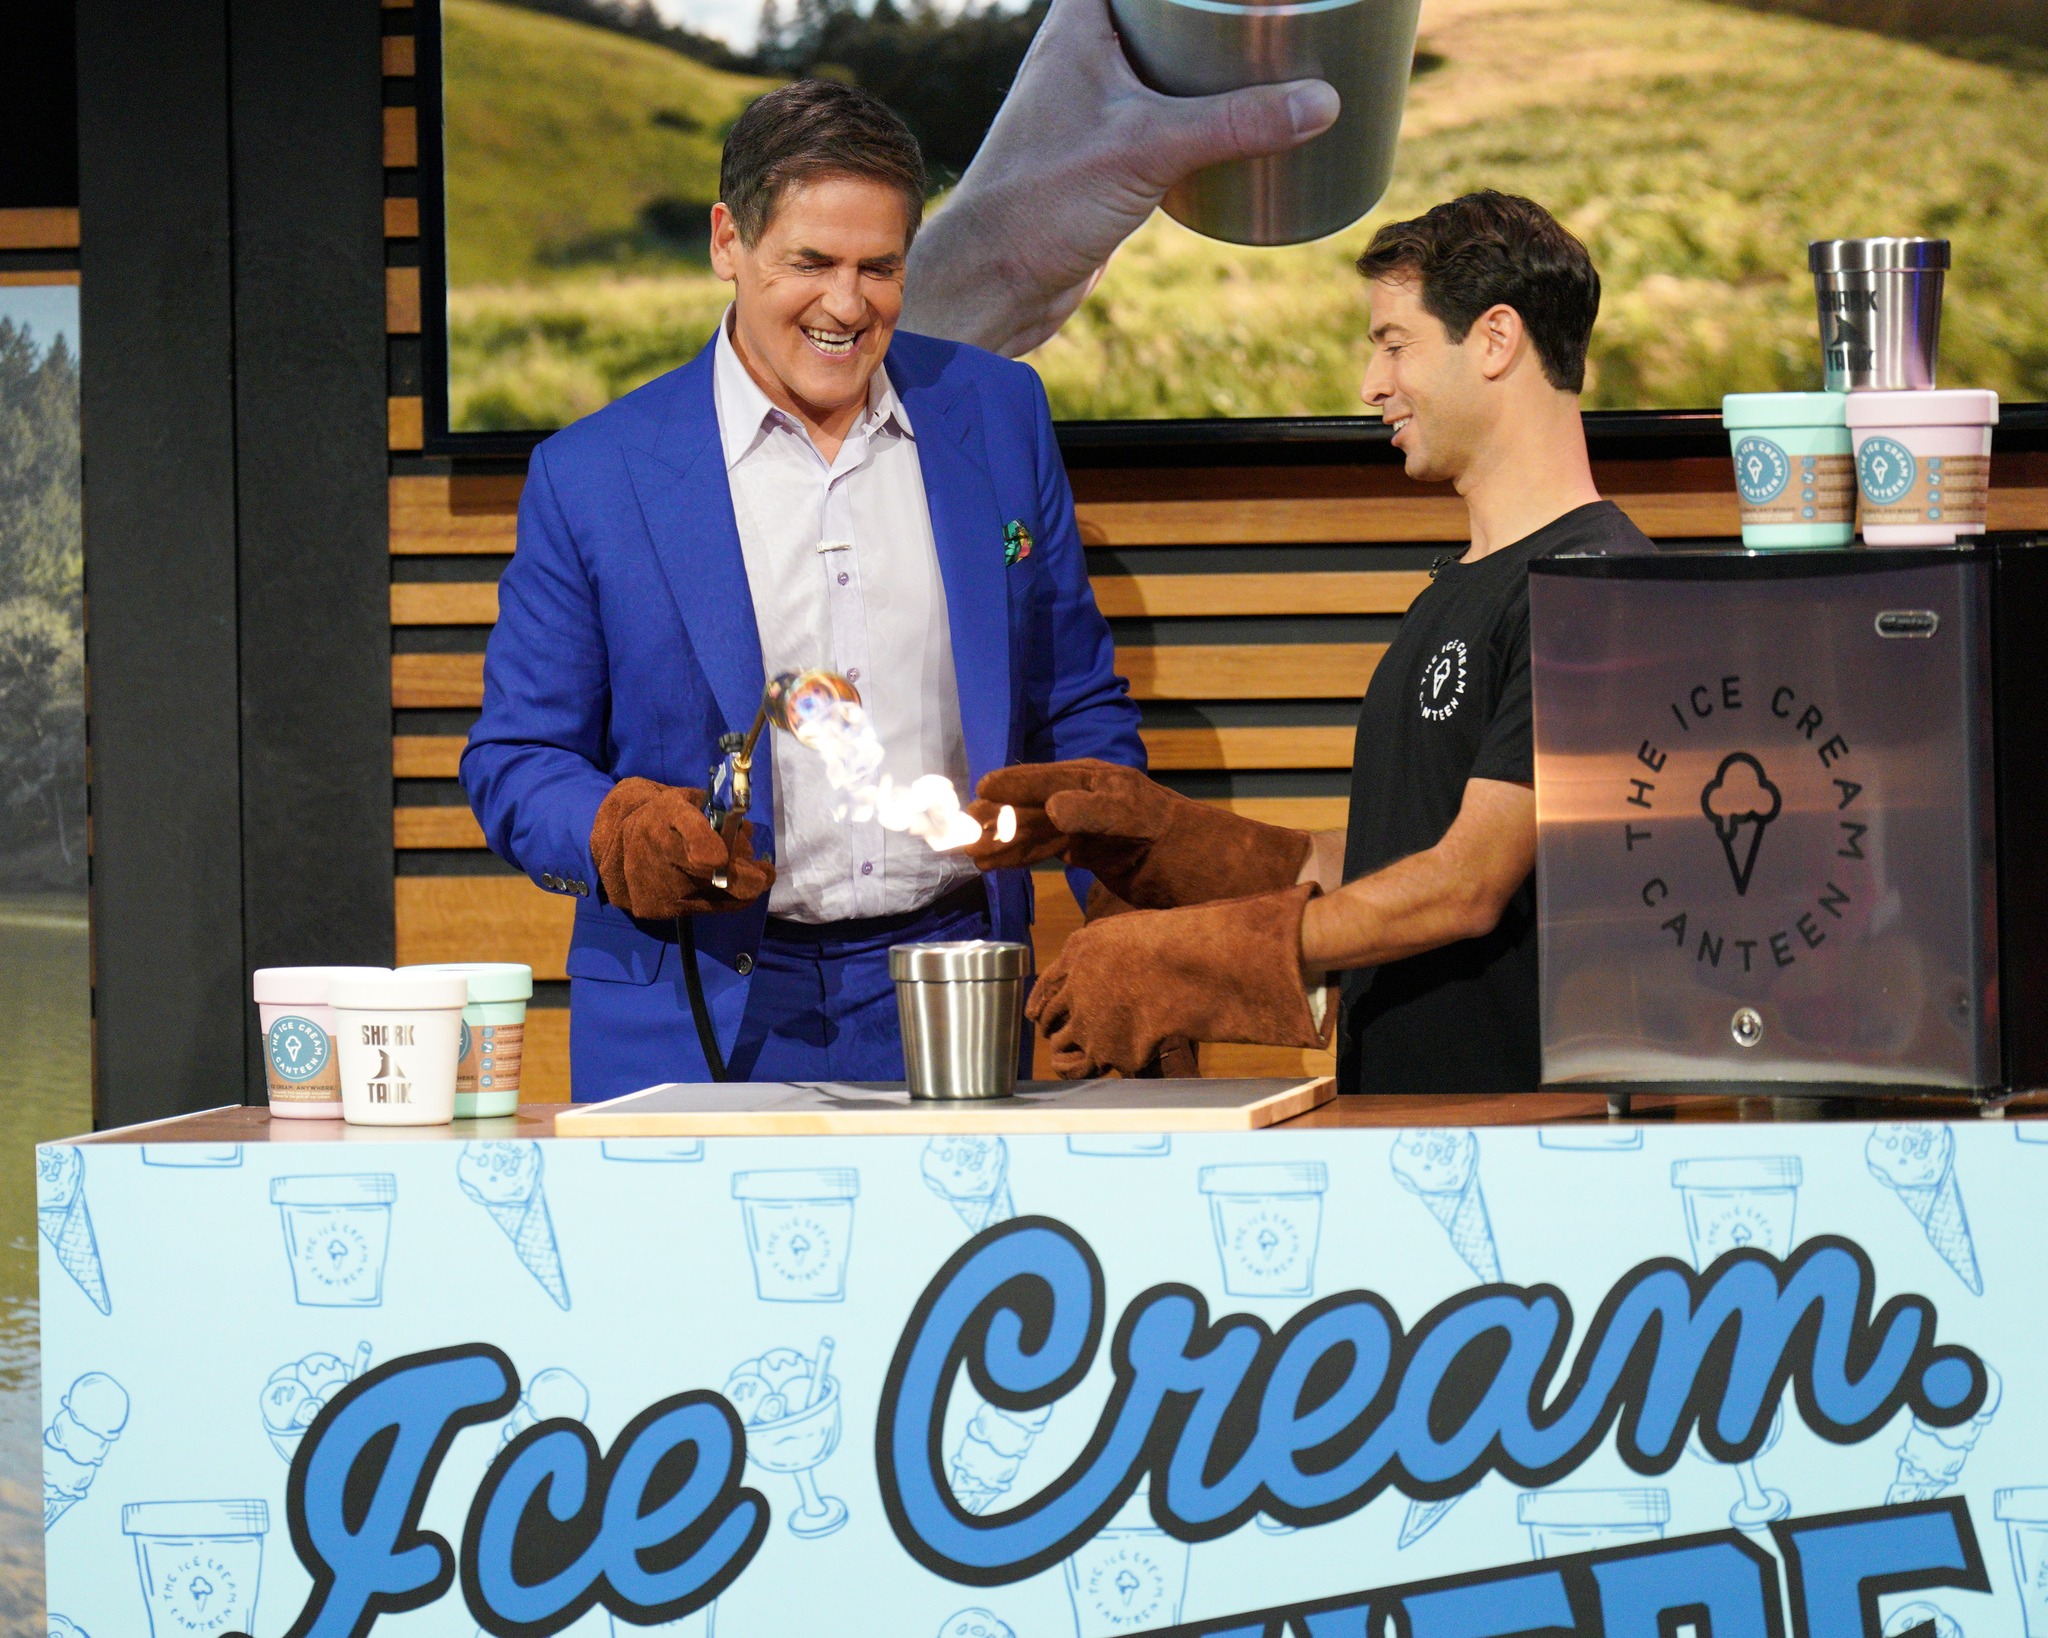 What Happened To Ice Cream Canteen After Shark Tank?